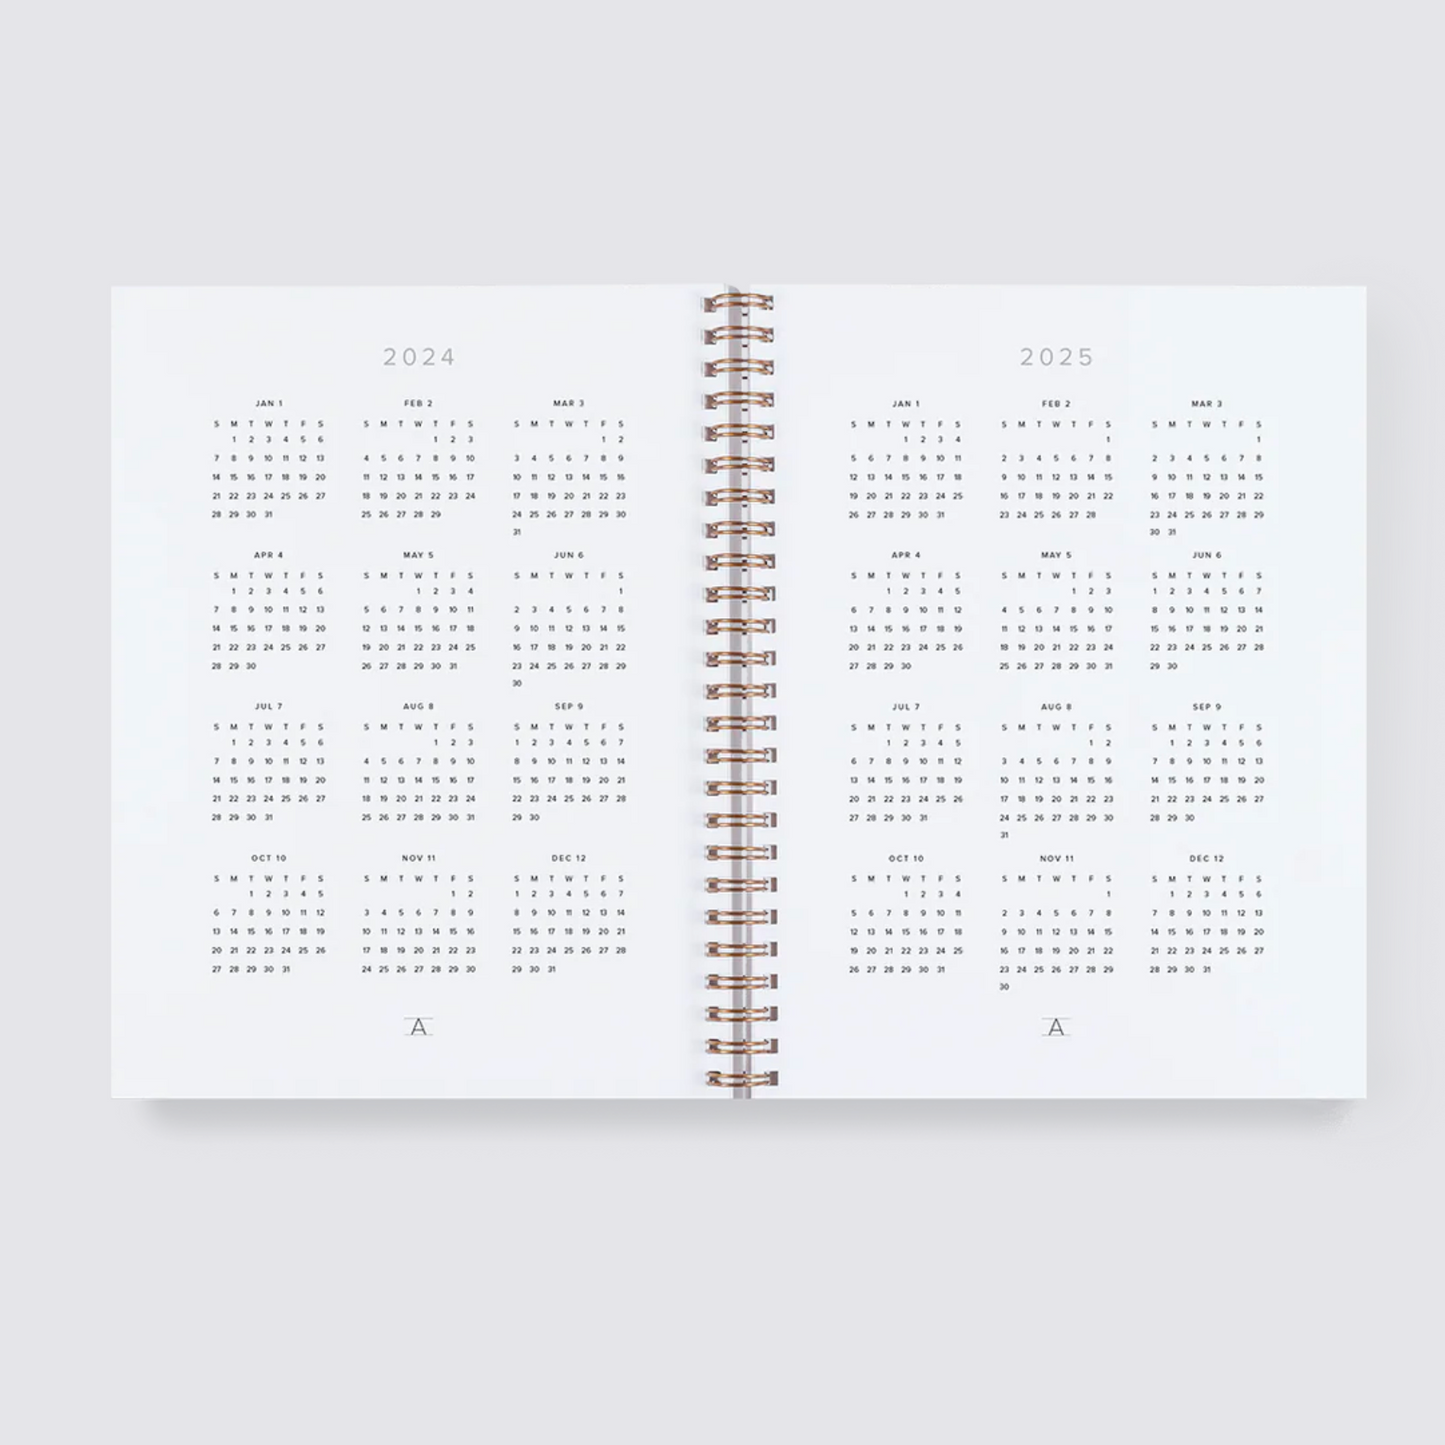 2024 Compact Task Planner - Mineral Green